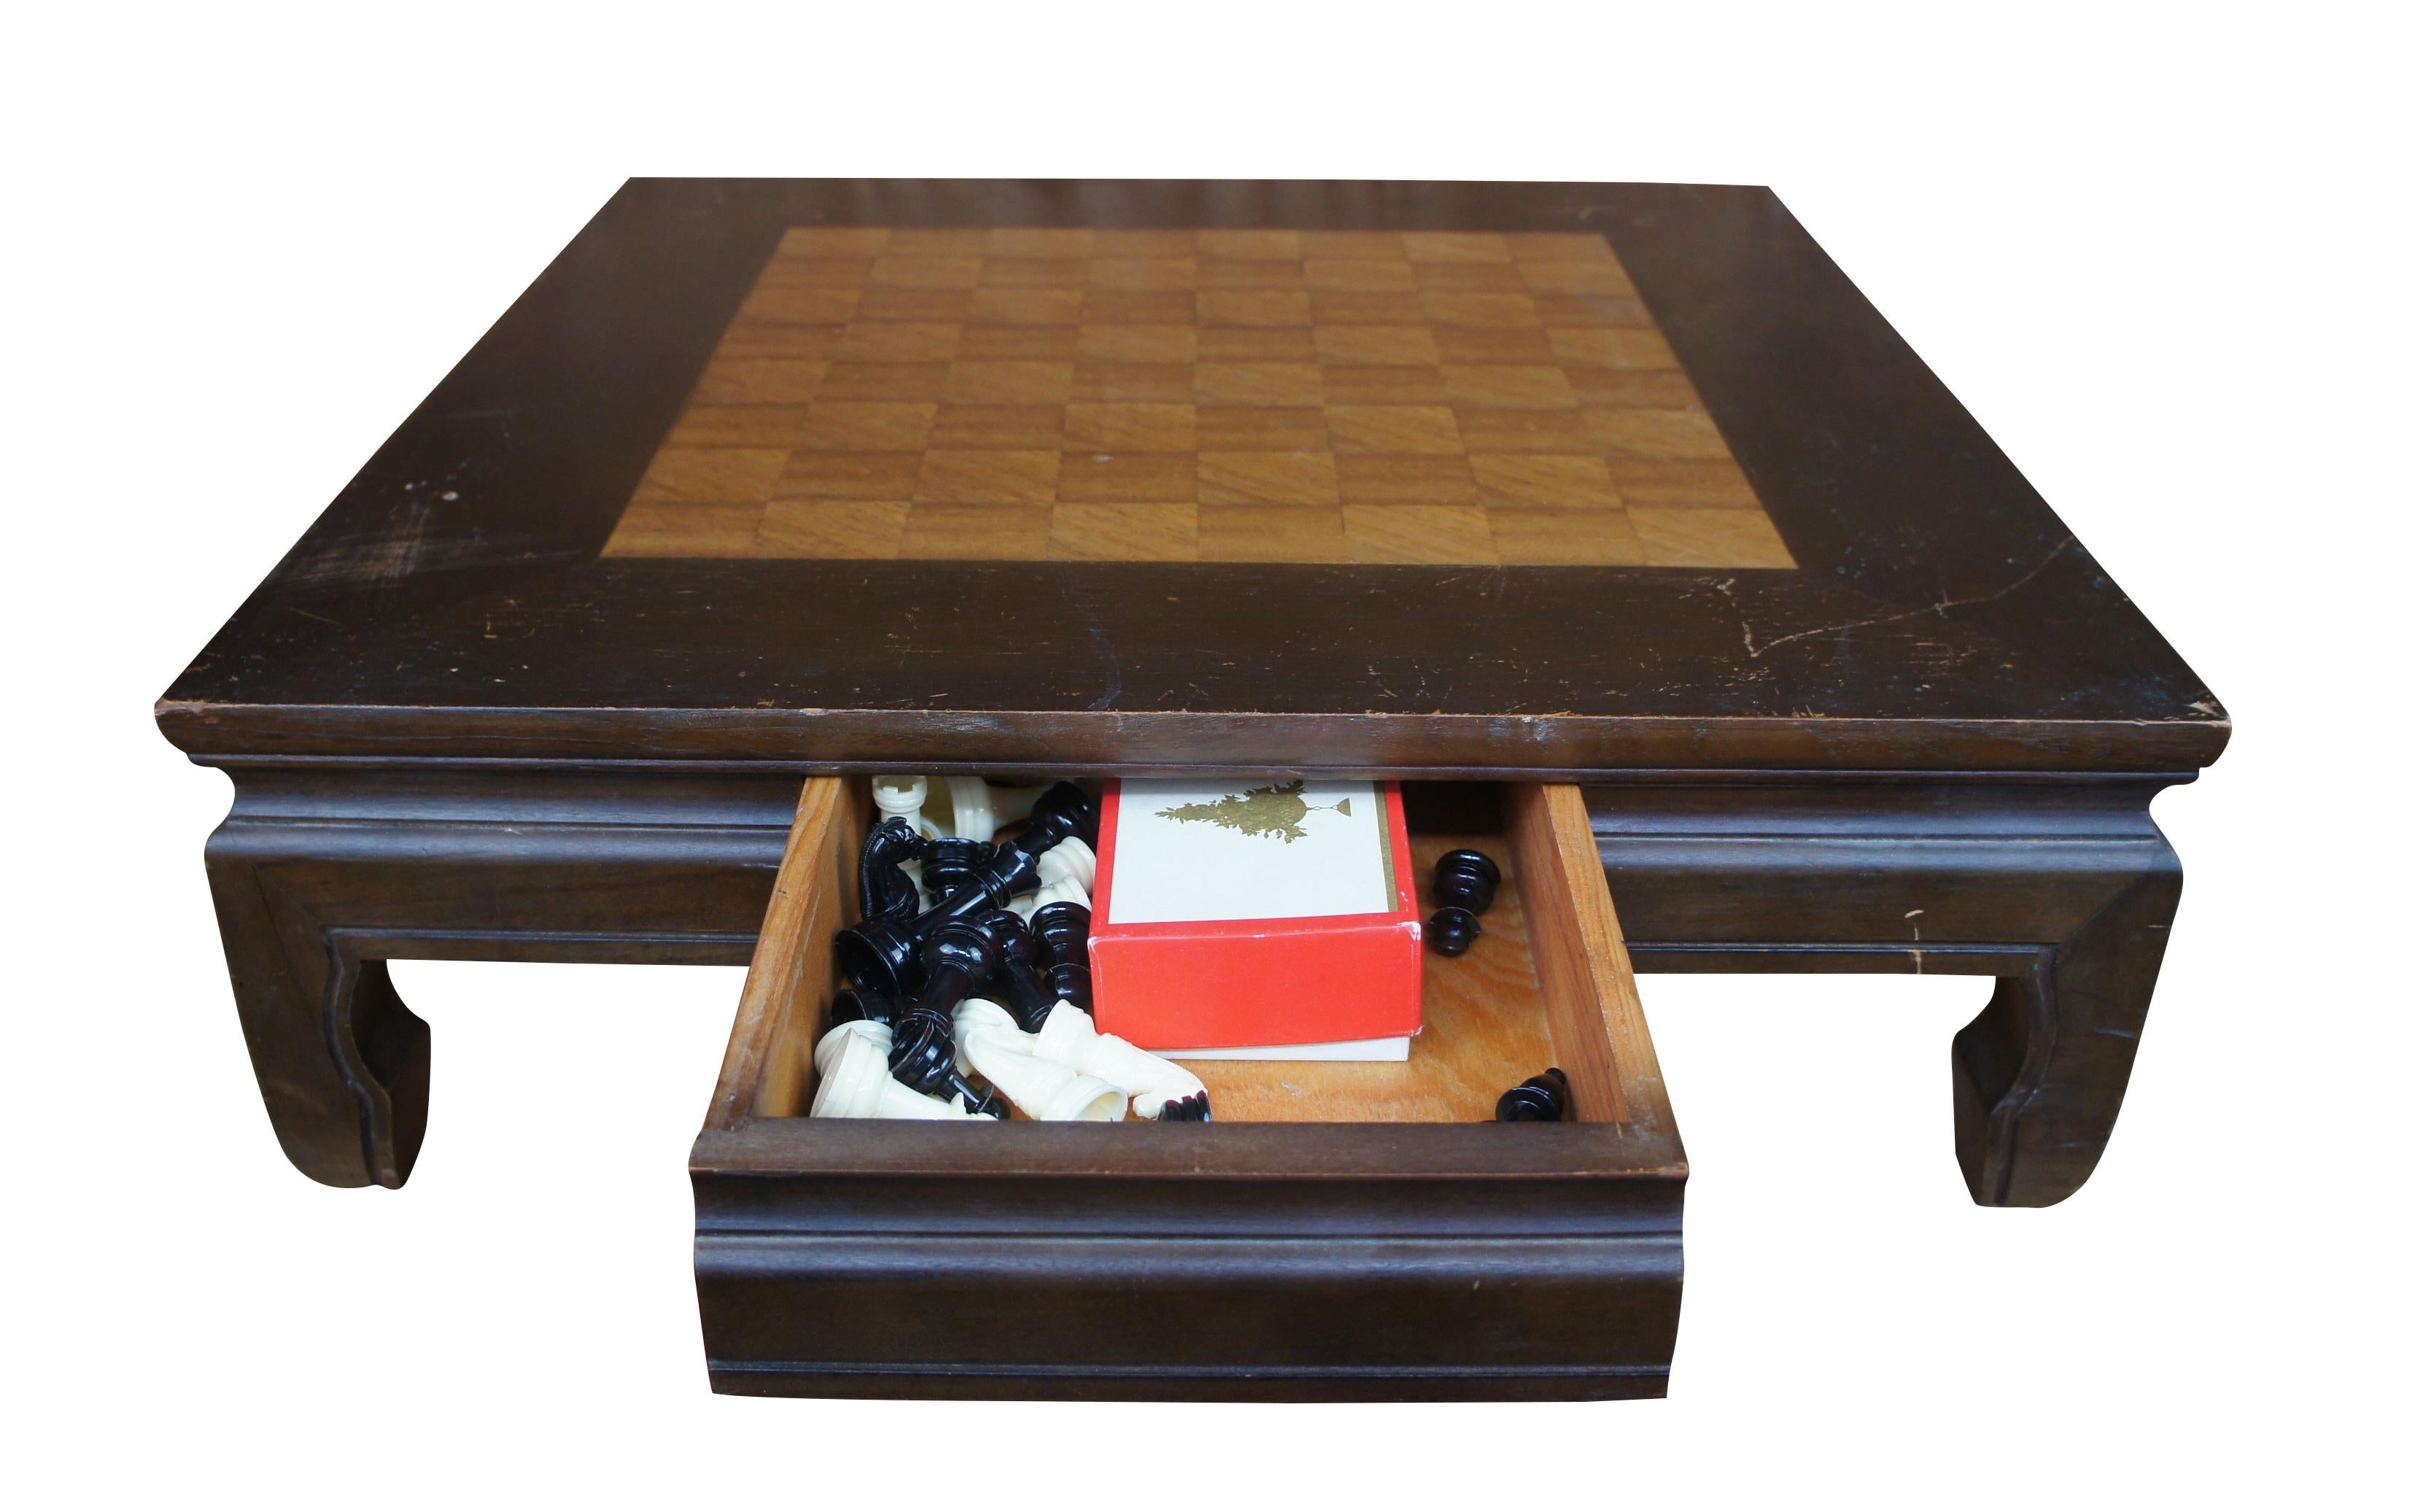 A handmade kiln dried hardwood tabletop chess board with ming styling featuring a sliding drawer that holds plastic chess and checkers pieces. Made in Keelung Taiwan by Oriental Woodcraft LTD.

Measures: board- 24